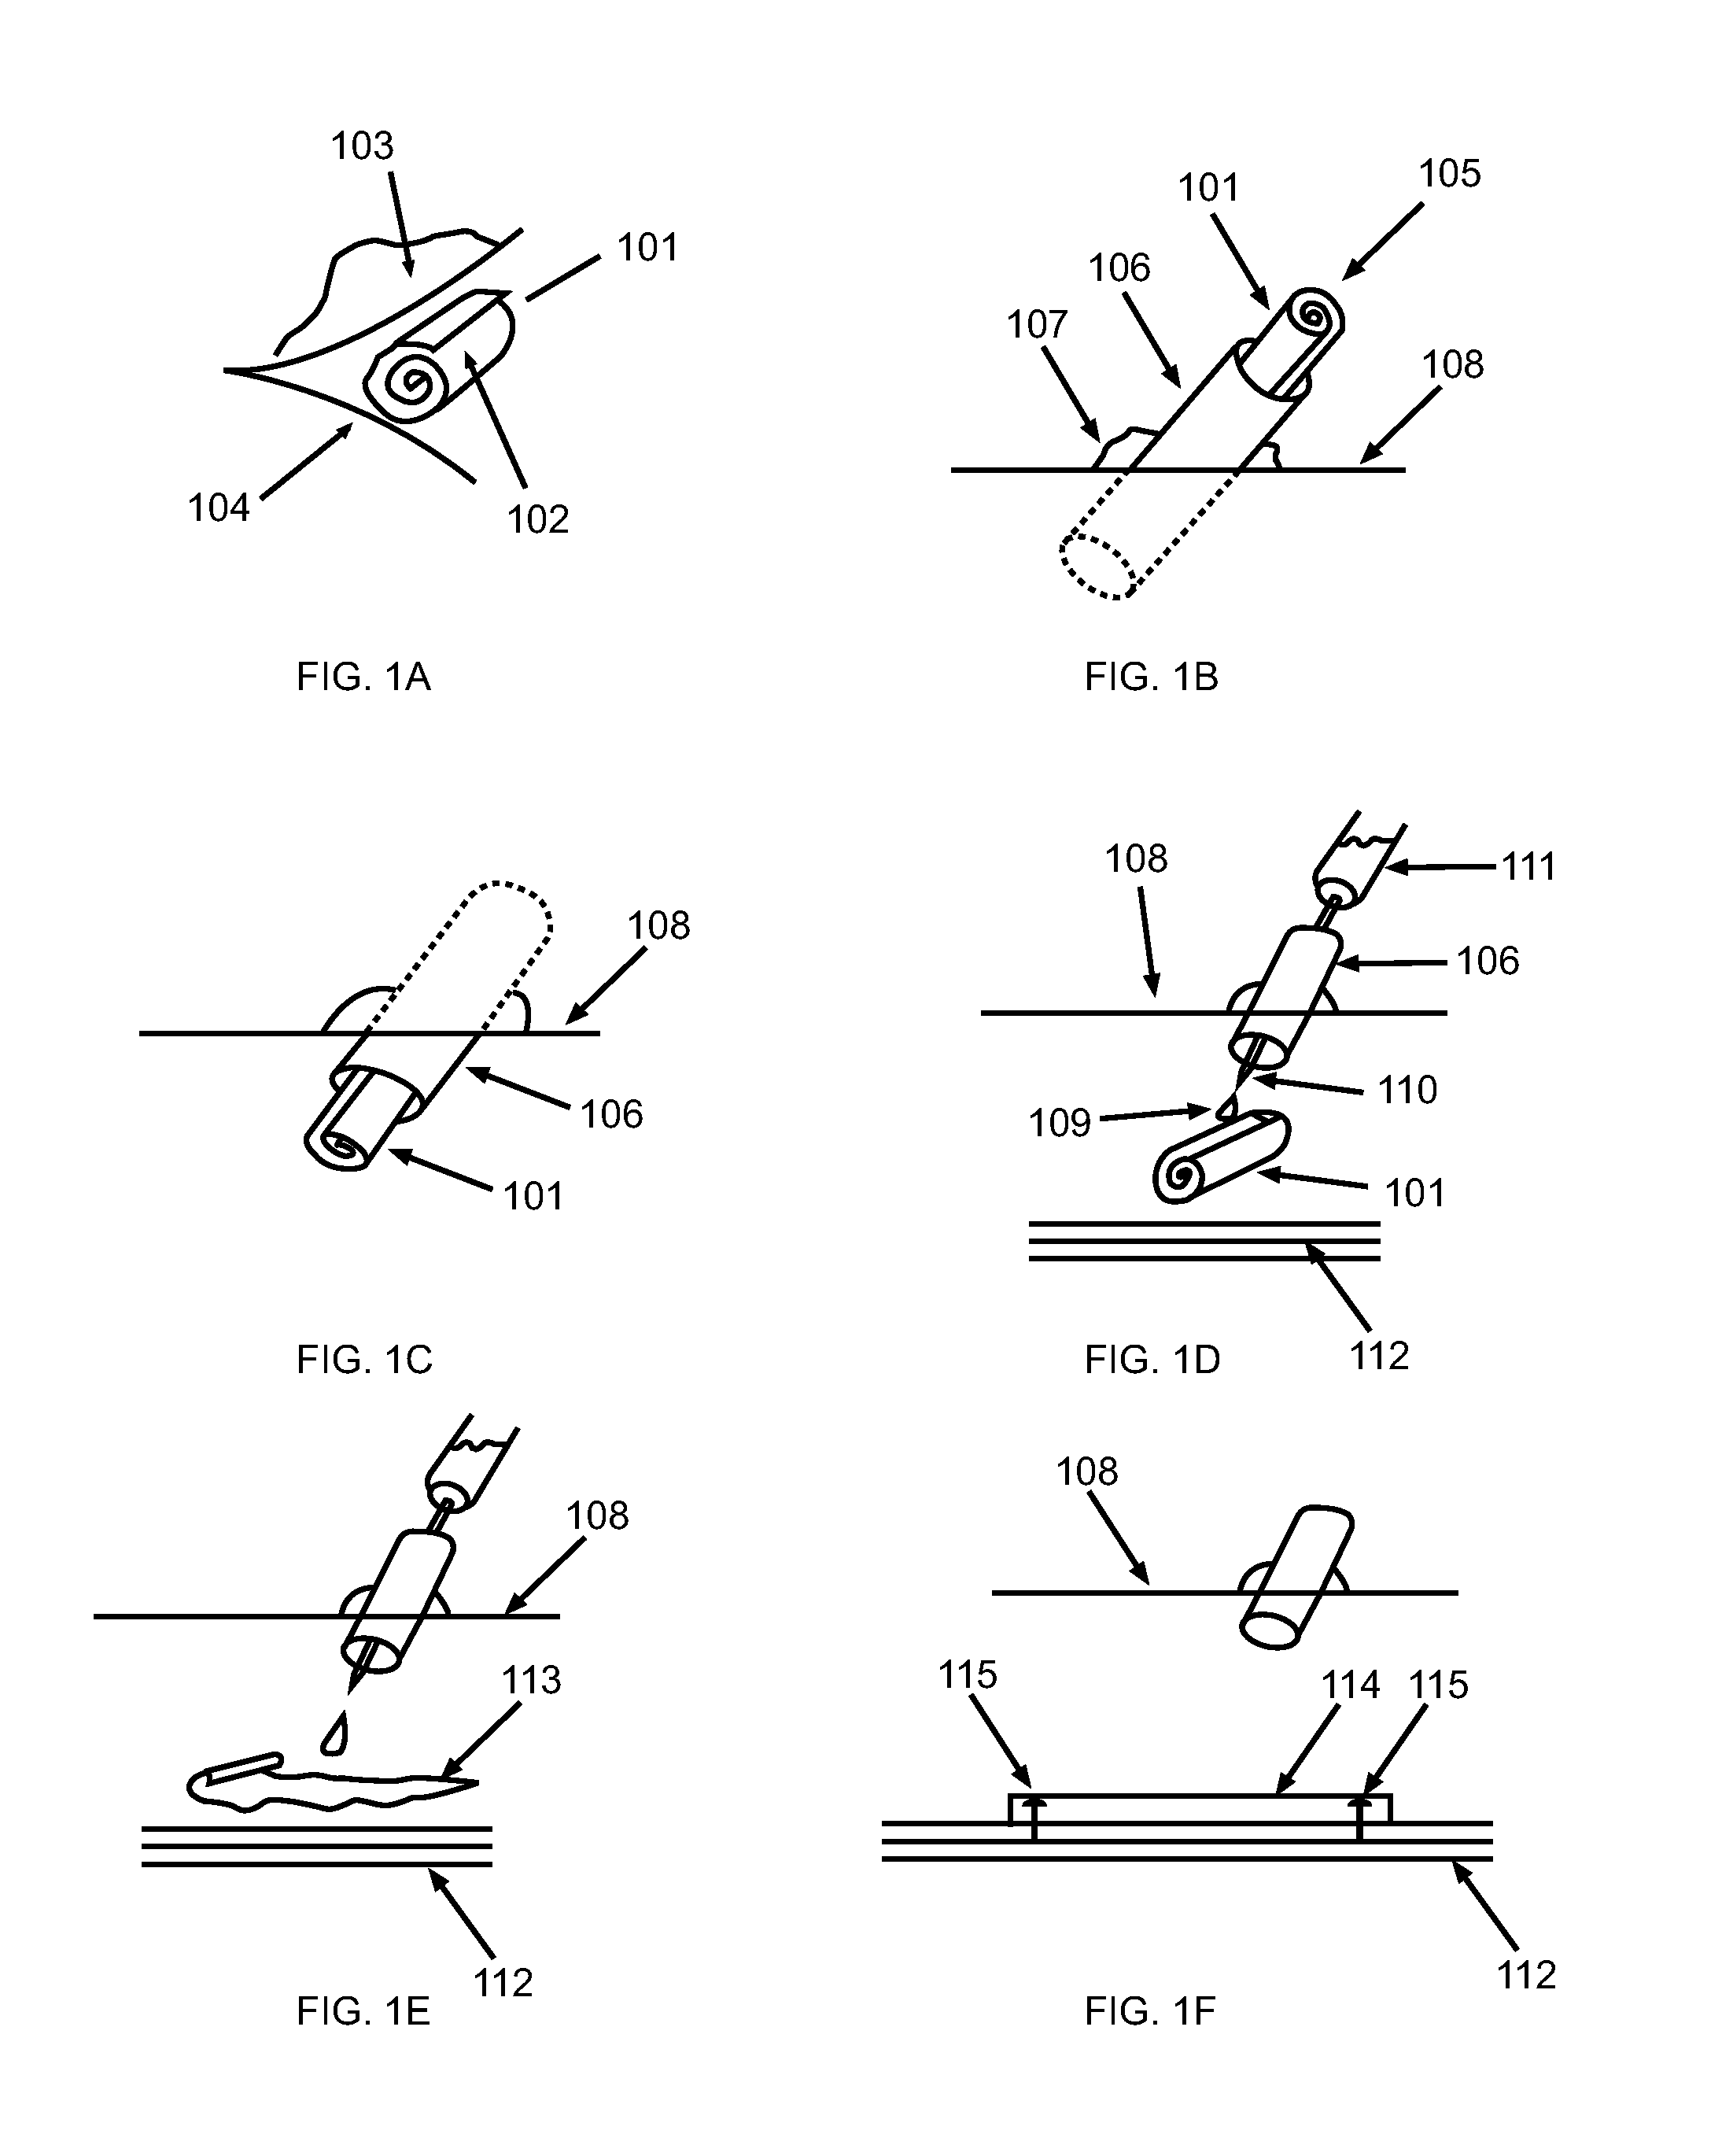 Novel biological implant compositions, implants and methods